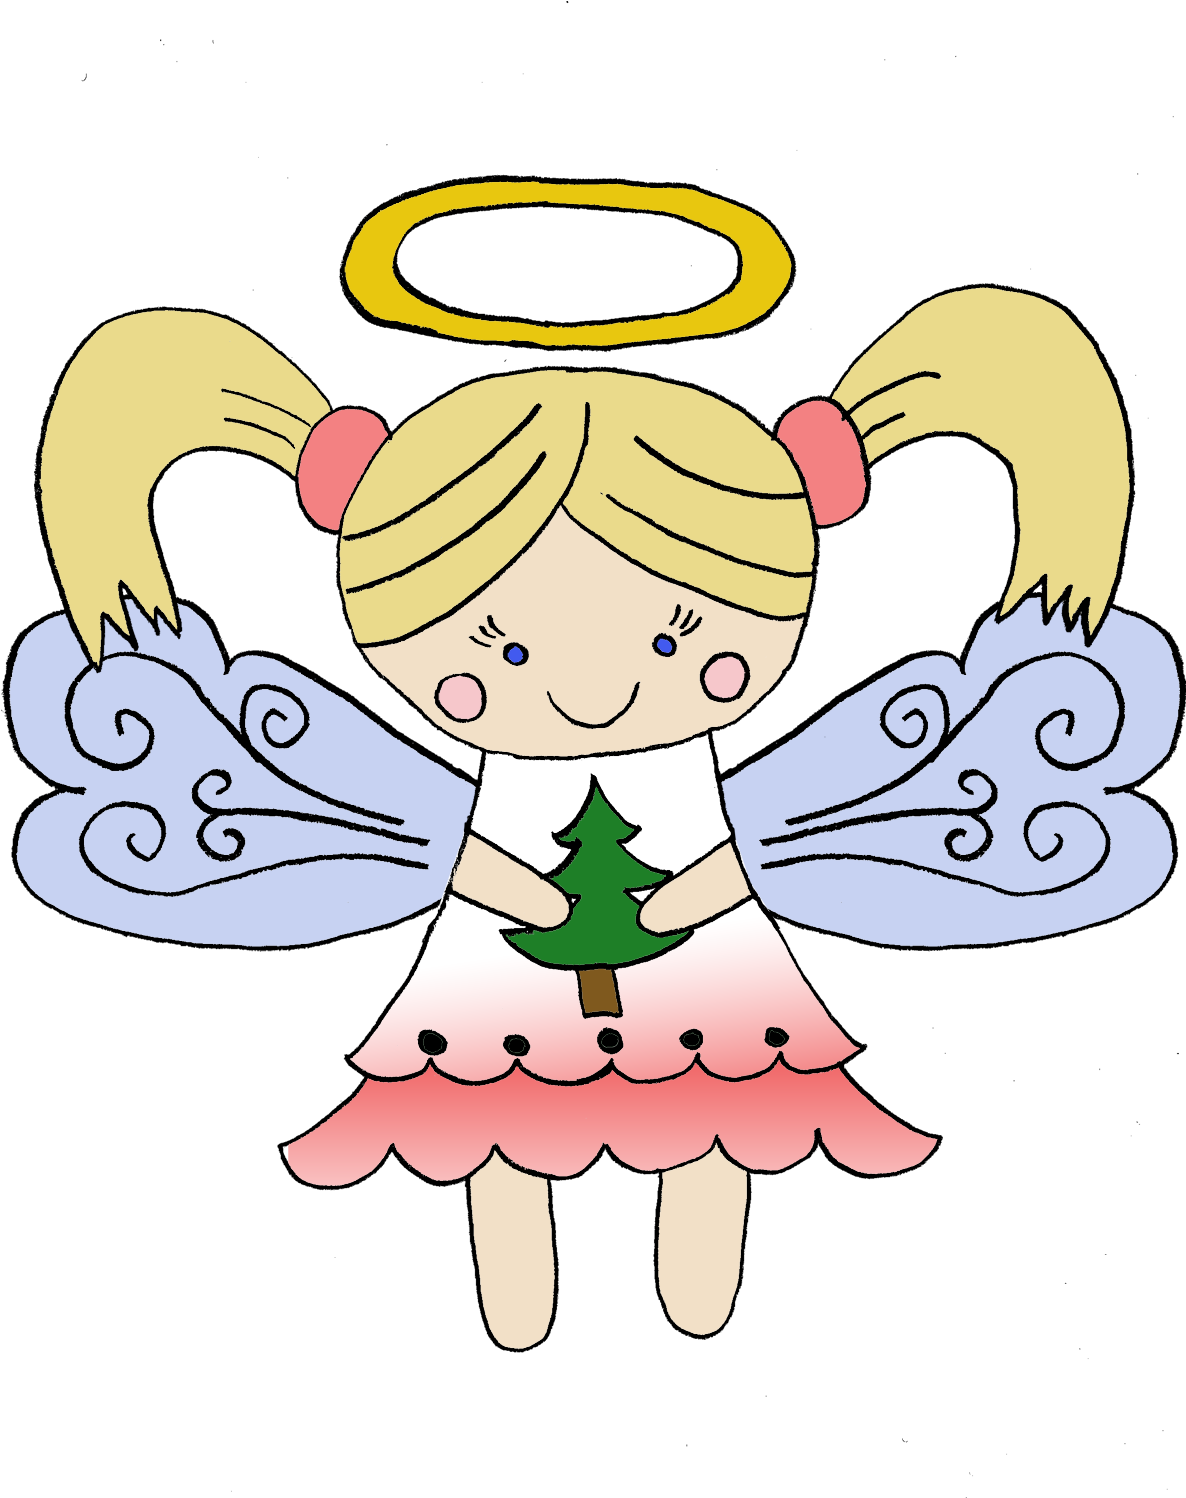 Eri Doodle Designs And Creations - Little Christmas Angel Embroidery Design (1200x1500)